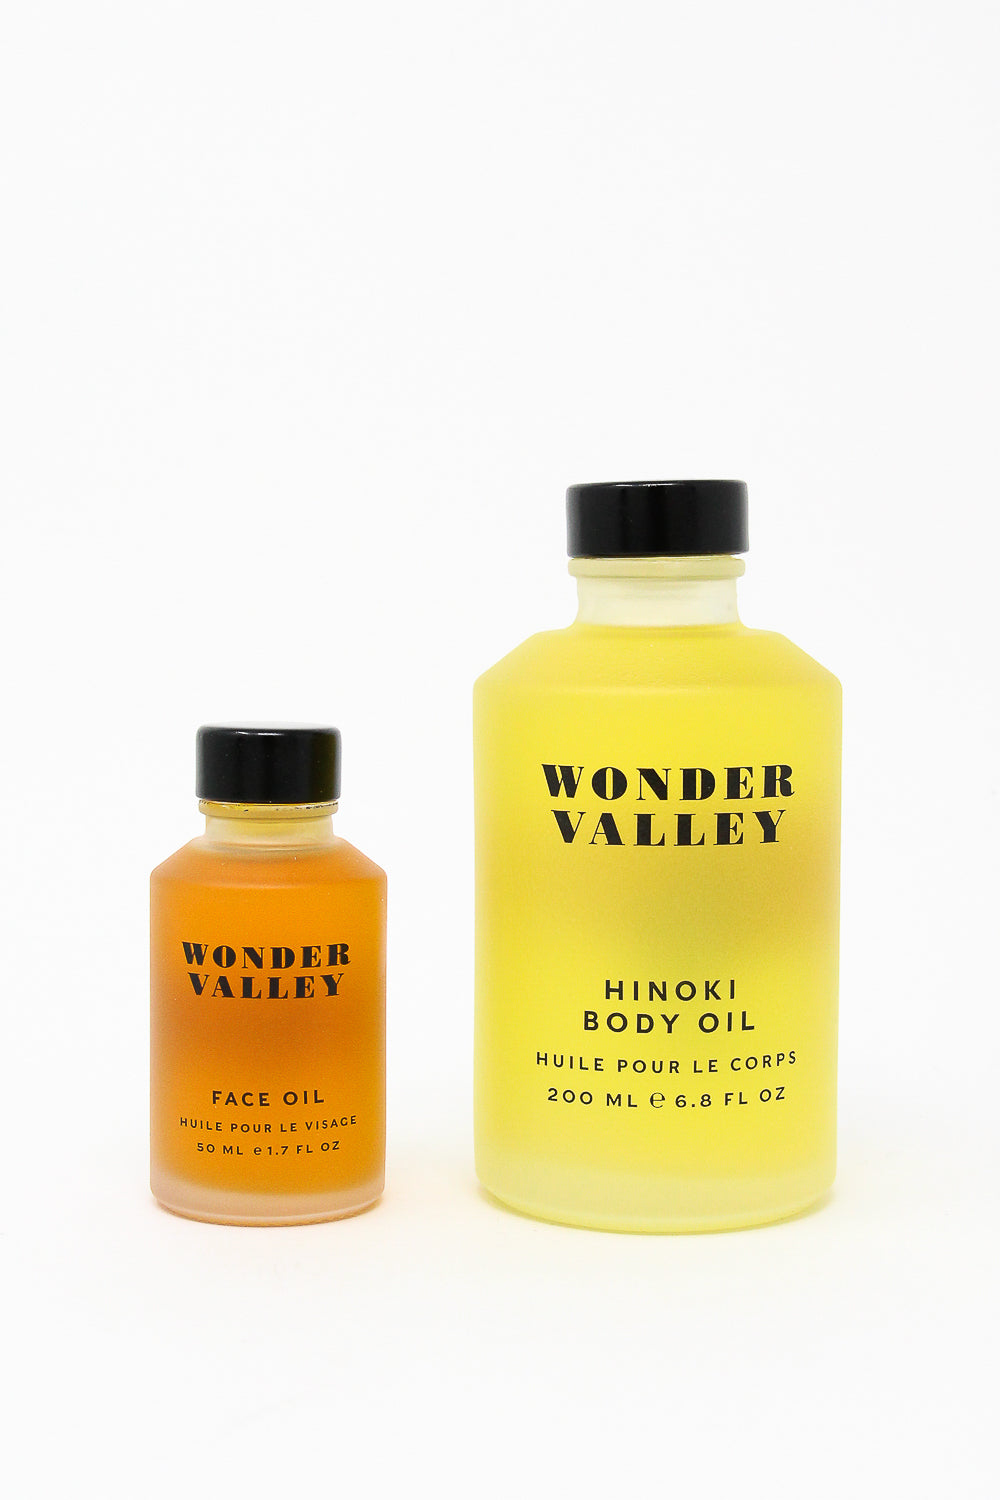 A bottle of Wonder Valley Face Oil, known to hydrate and revive various skin types, combined with a bottle of nourishing jojoba oil.